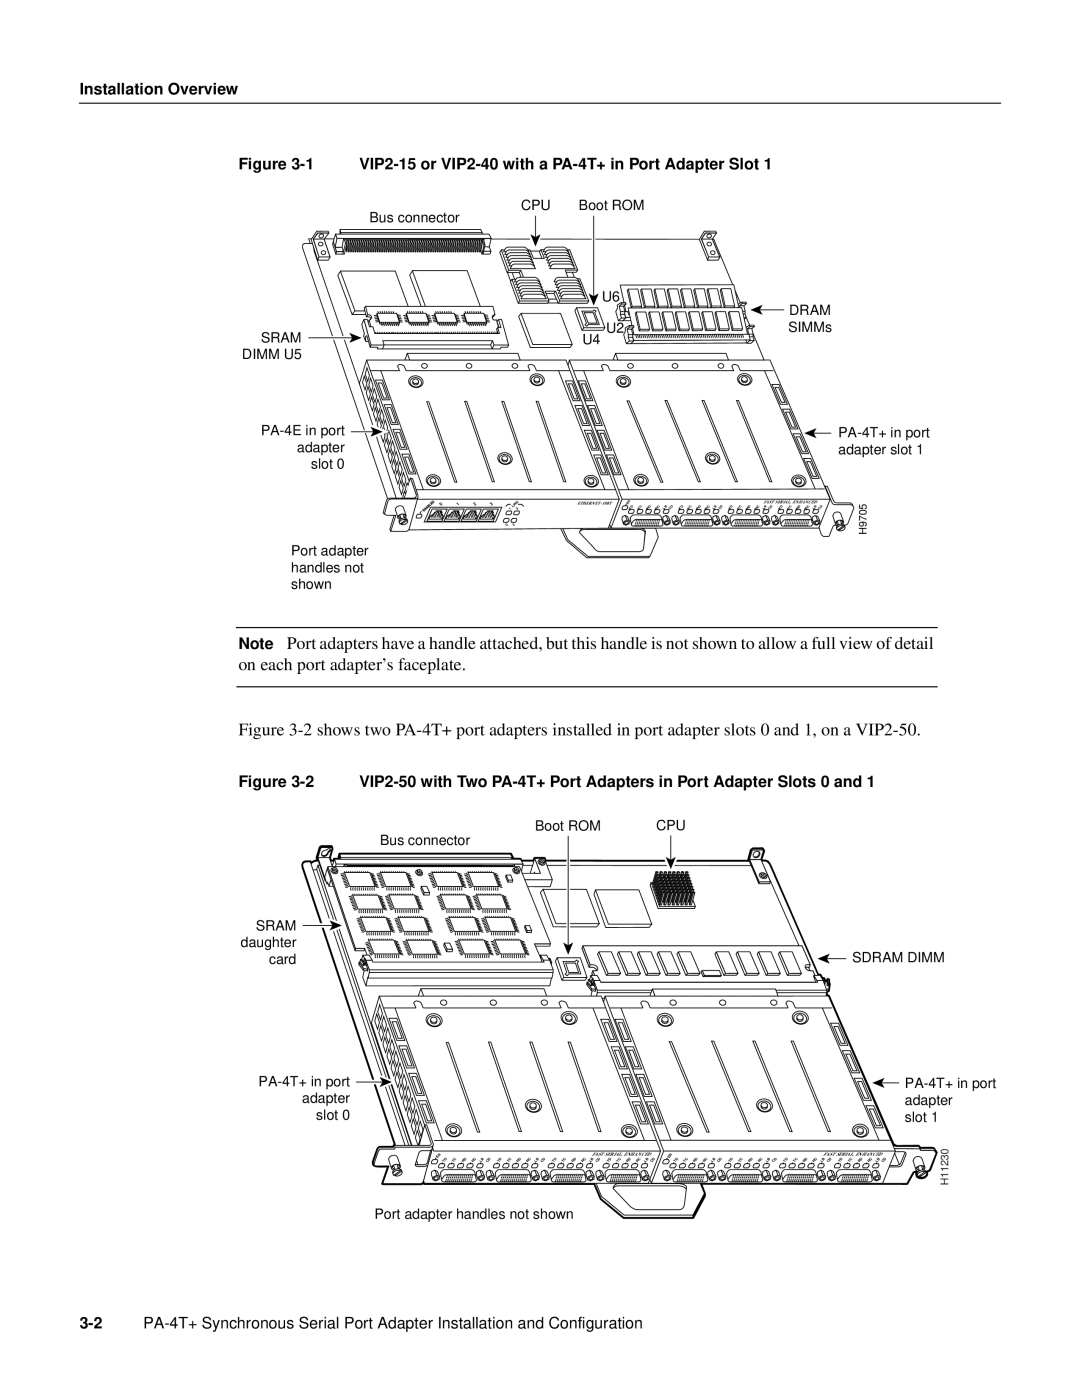 Cisco Systems manual Installation Overview, 1 VIP2-15 or VIP2-40 with a PA-4T+ in Port Adapter Slot, daughter 